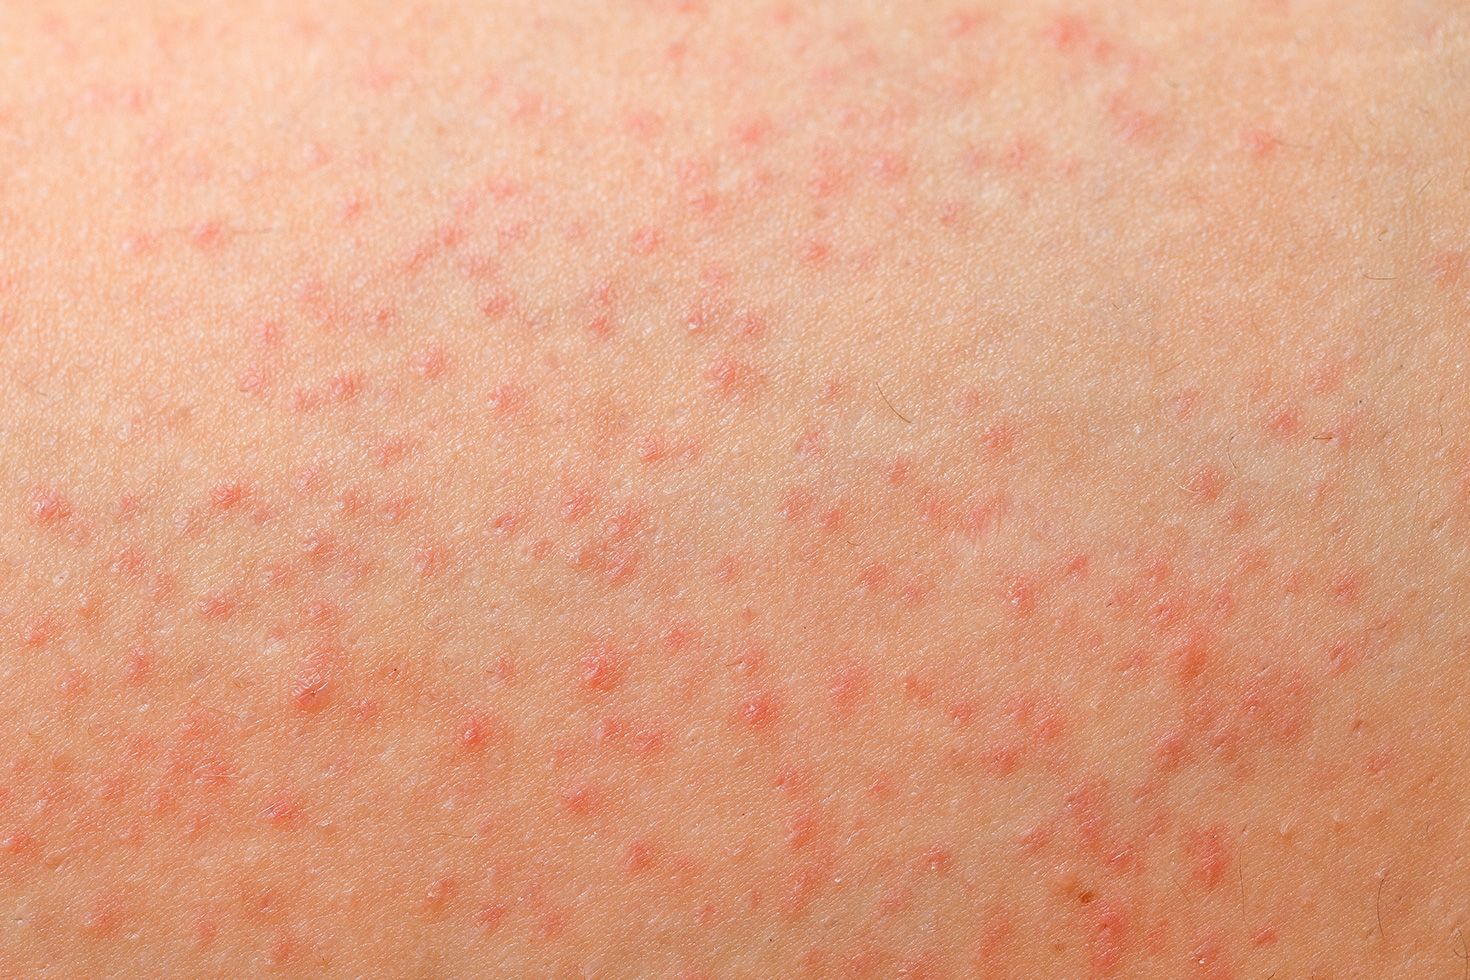 Risikabel Lys kode 13 Common Causes Of Butt Rashes And Bumps, According To MDs